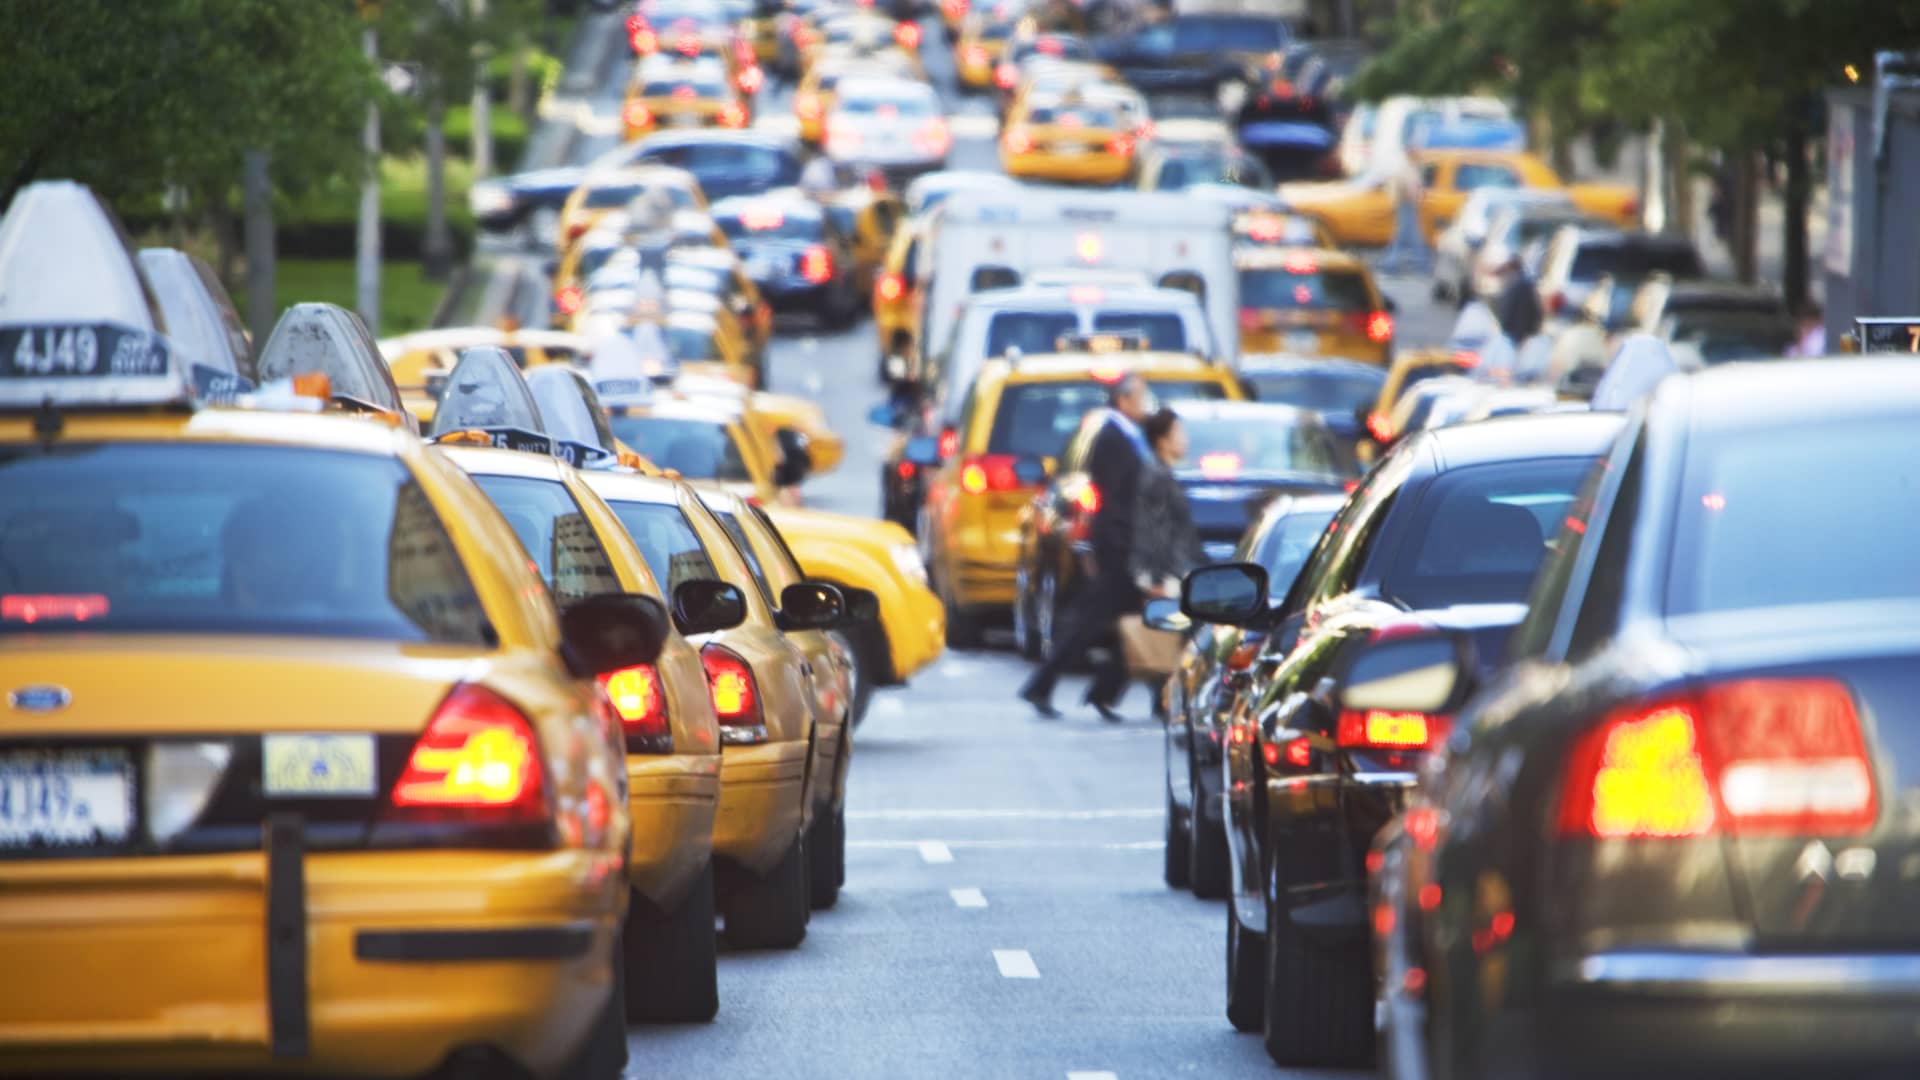 New York City has the worst traffic in America, according to a new report.